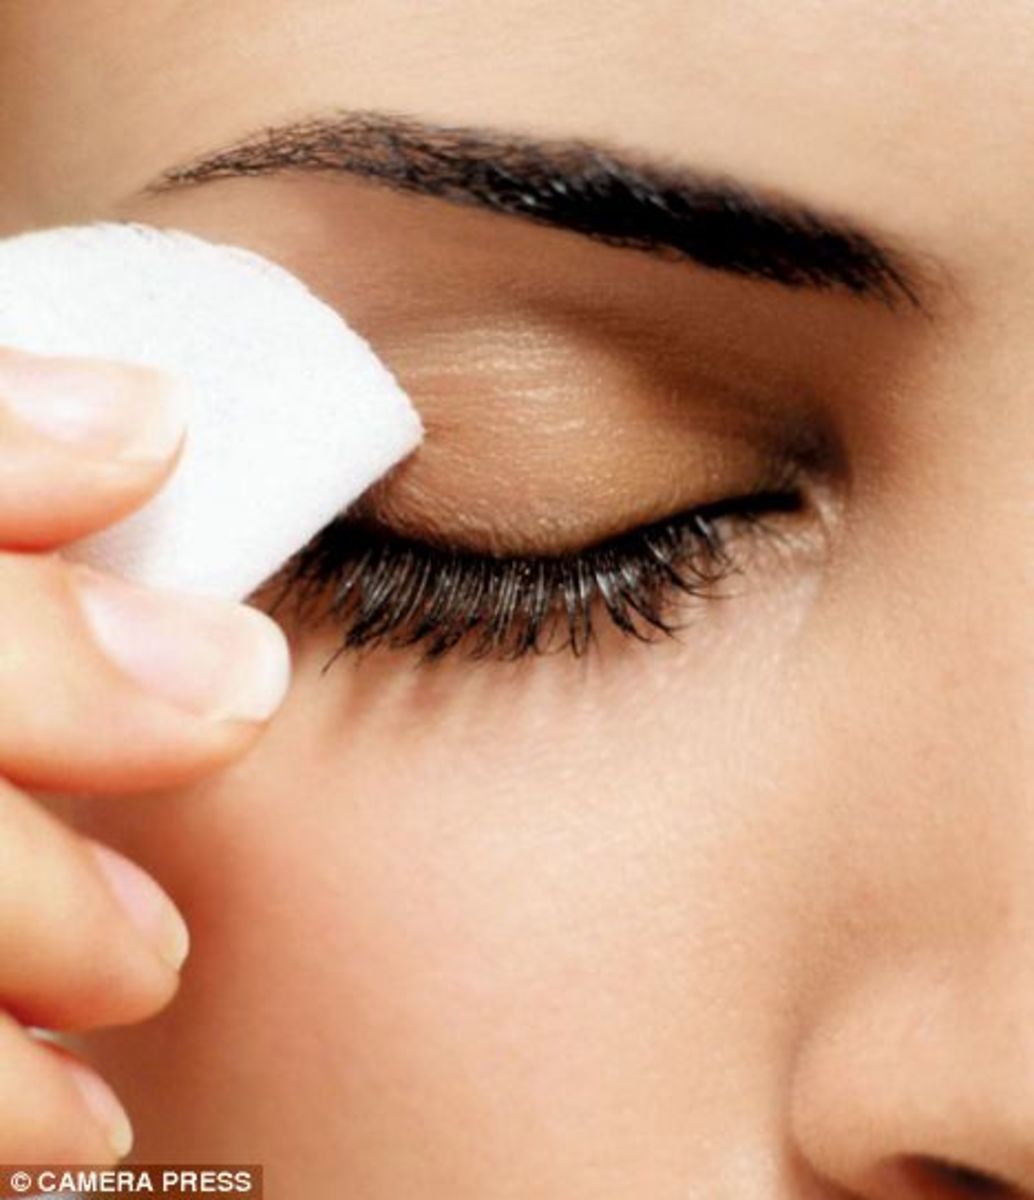 homemade-beauty-solutions-natural-skincare-recipes-for-eye-creams-and-gels